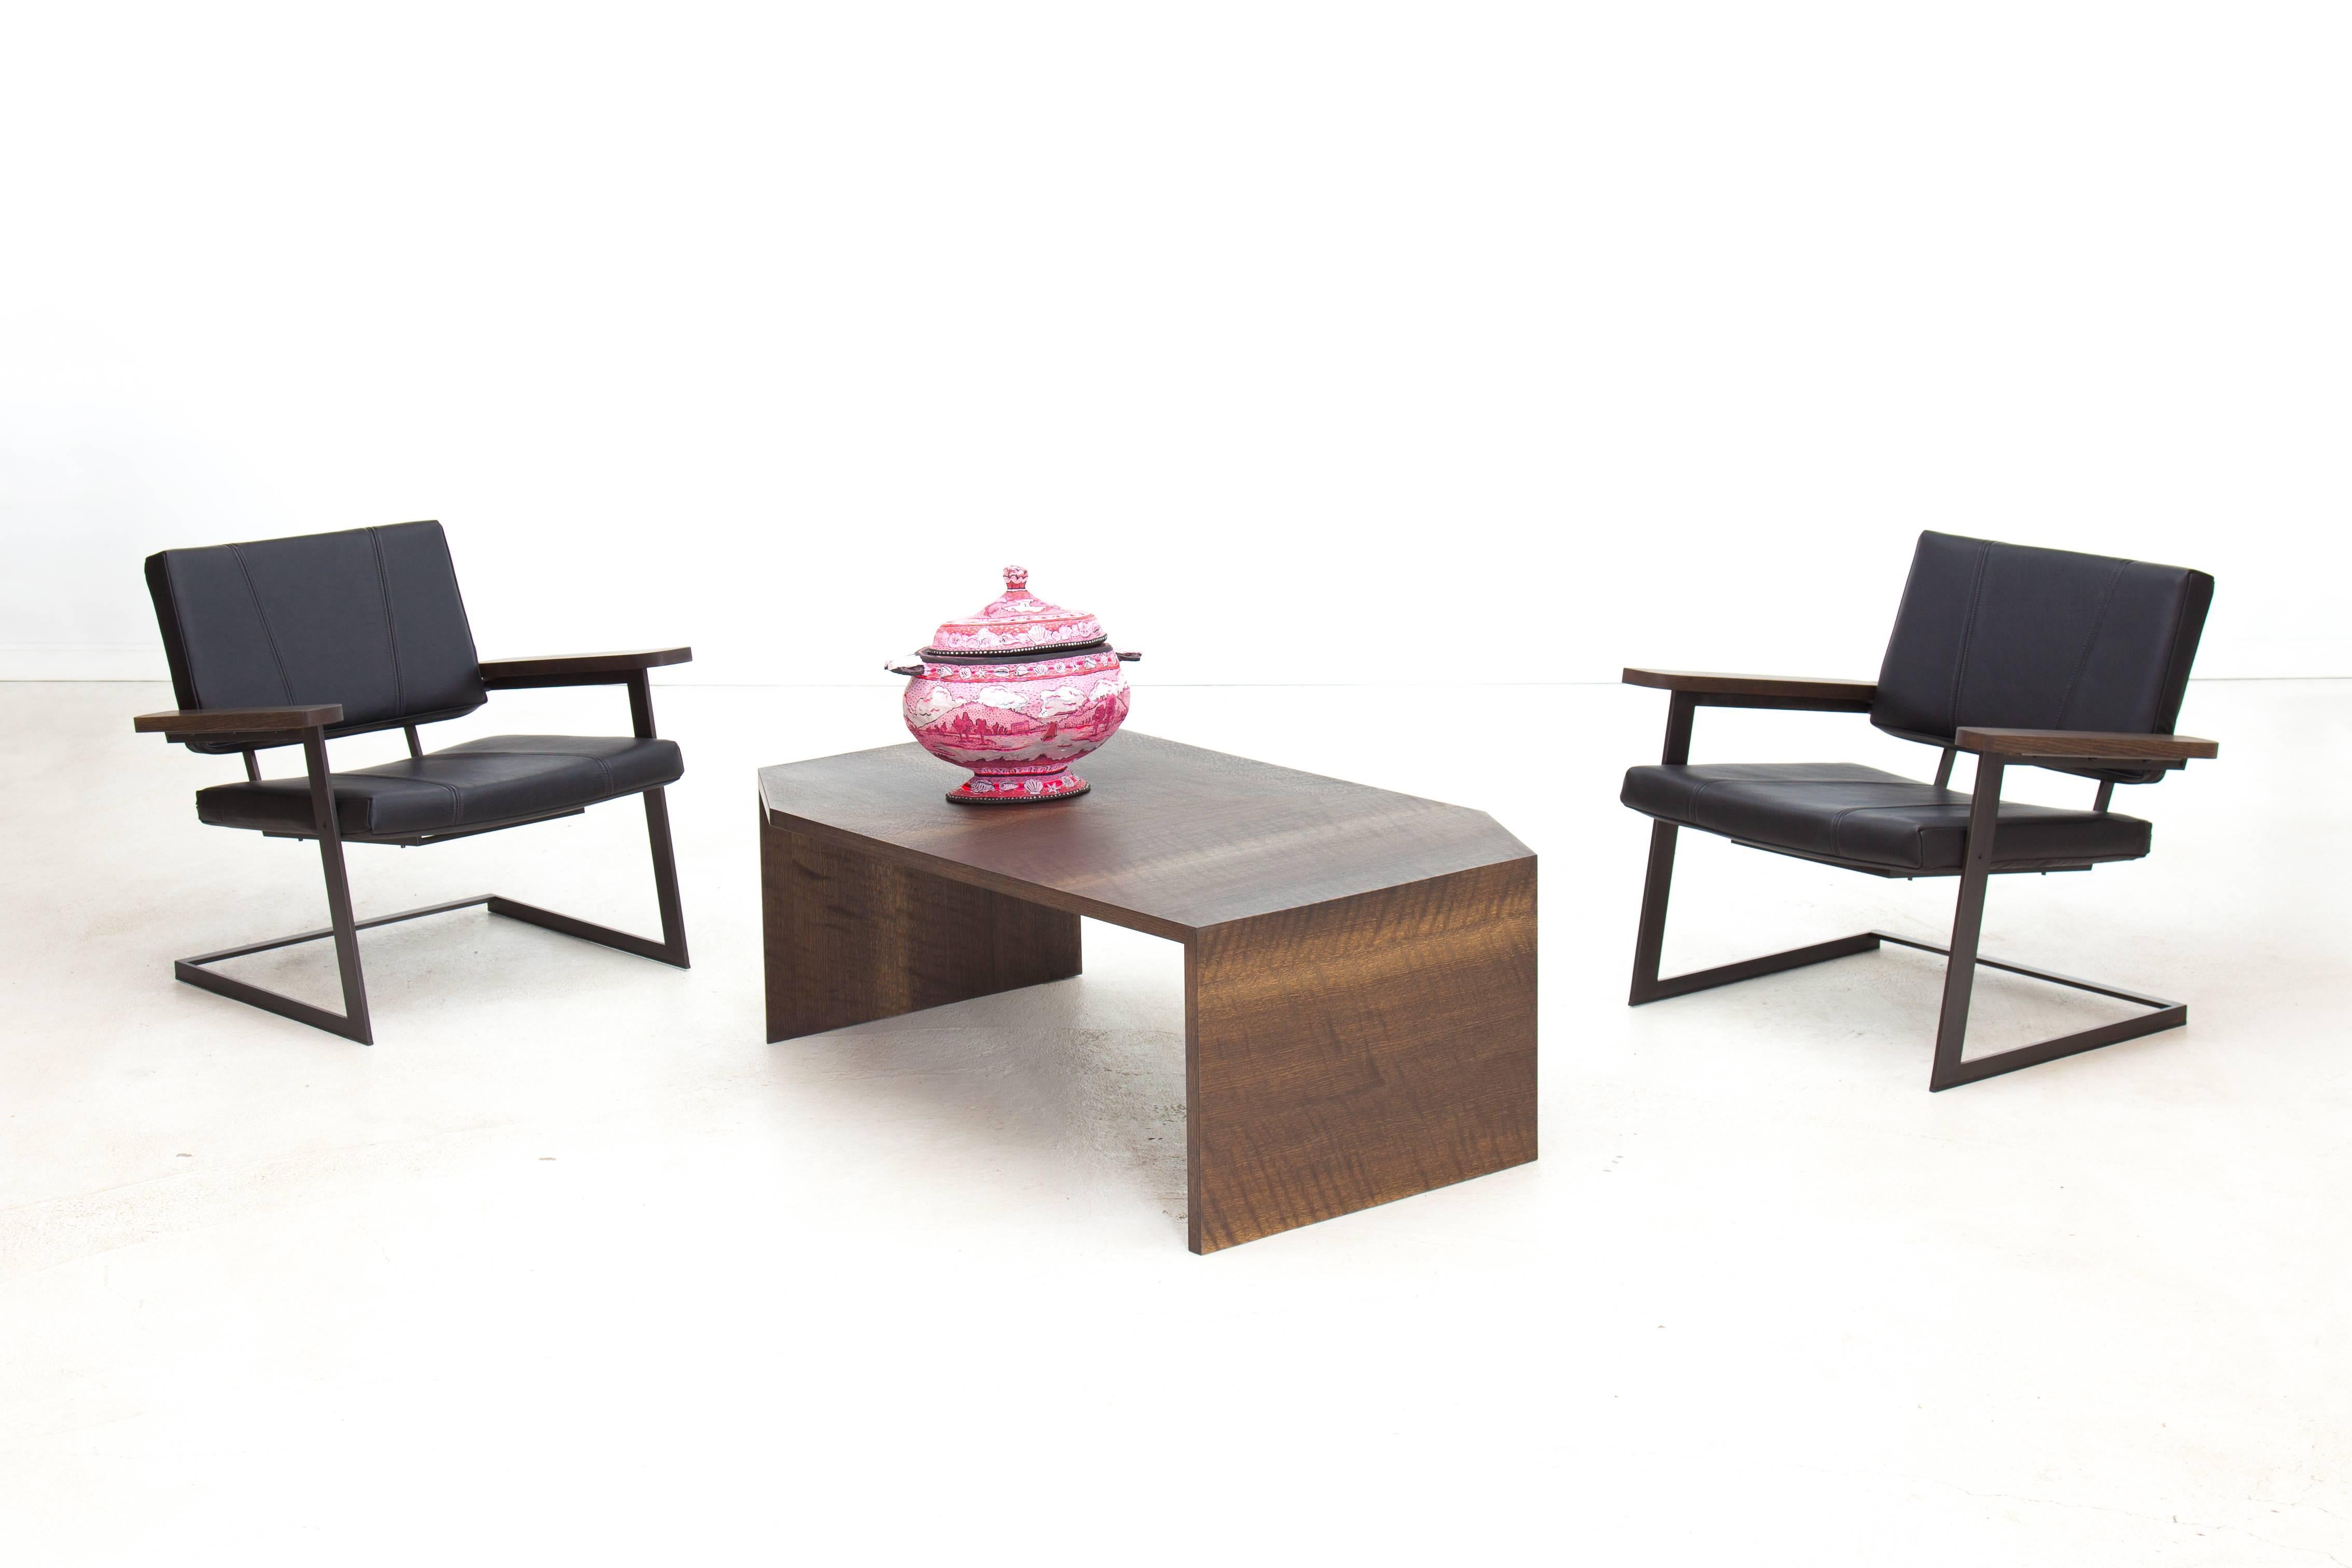 The angles and form of the Kiki Low Table are a nod to Brutalist architecture and minimalist sculpture of the 1960s and 1970s. Shown in patterned ebonized oak and available in a variety of American hardwoods. The Kiki Low Table is made to order, so